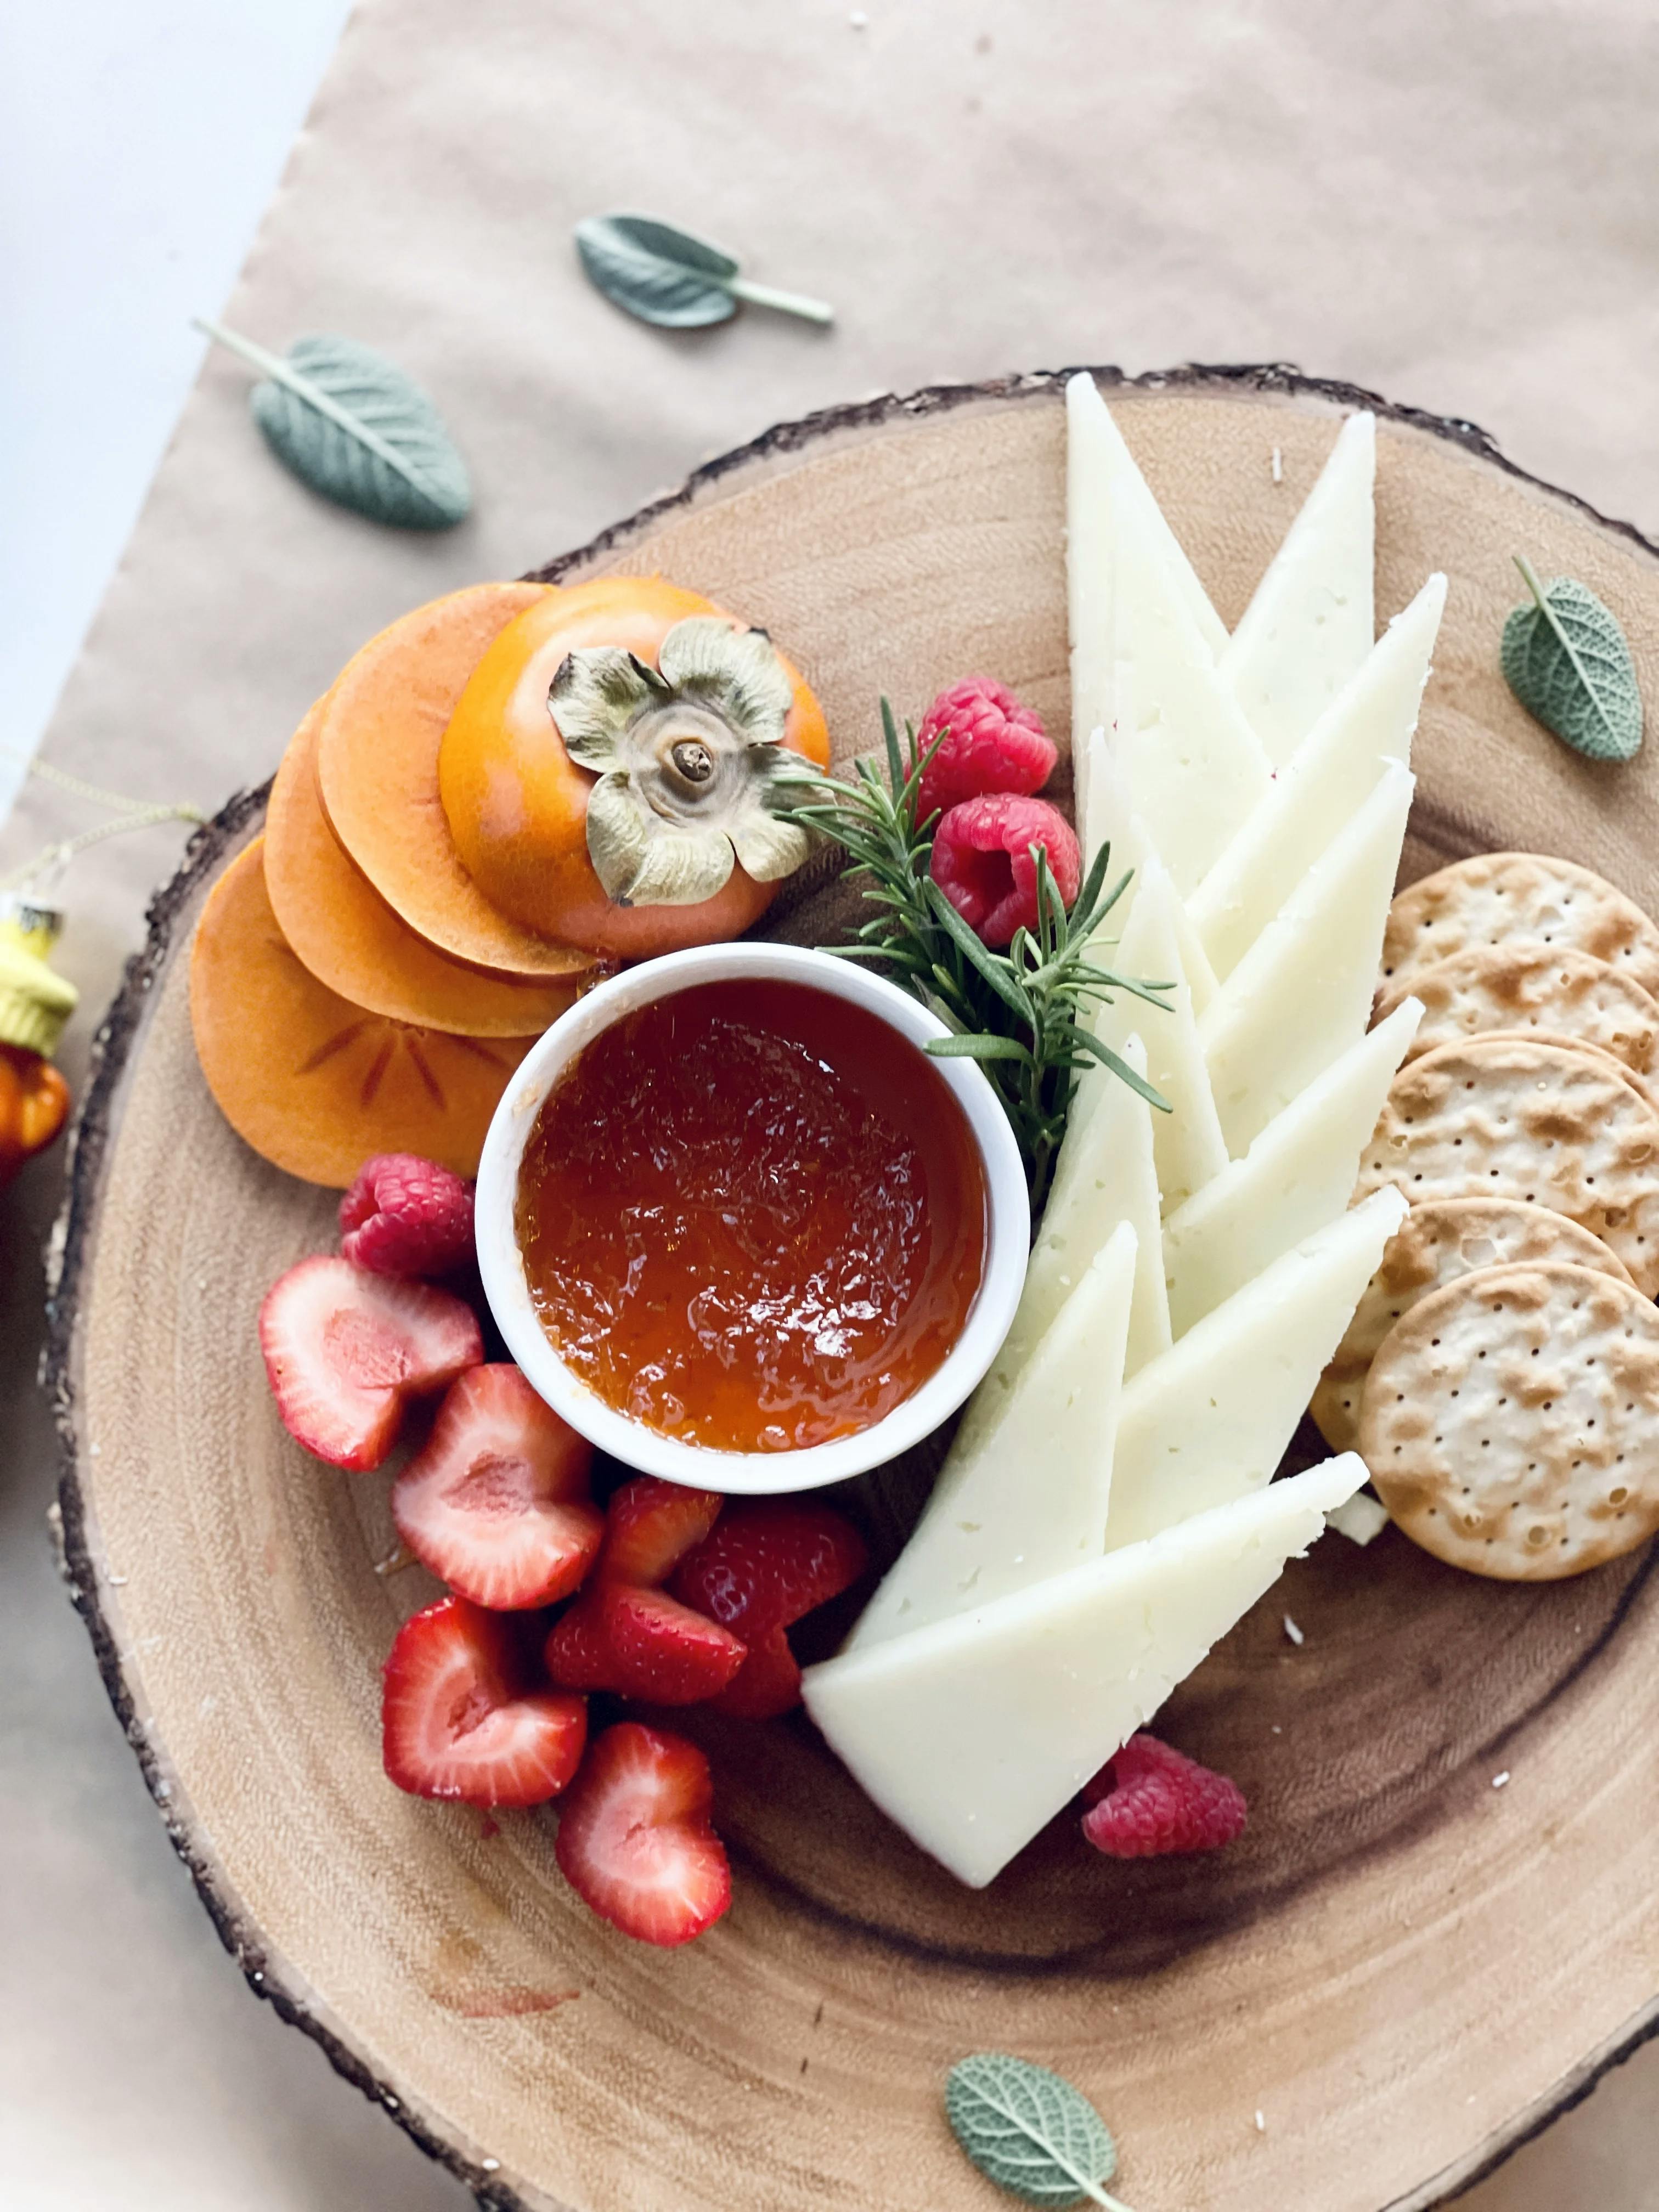 Picture for Simple Cheese Plate